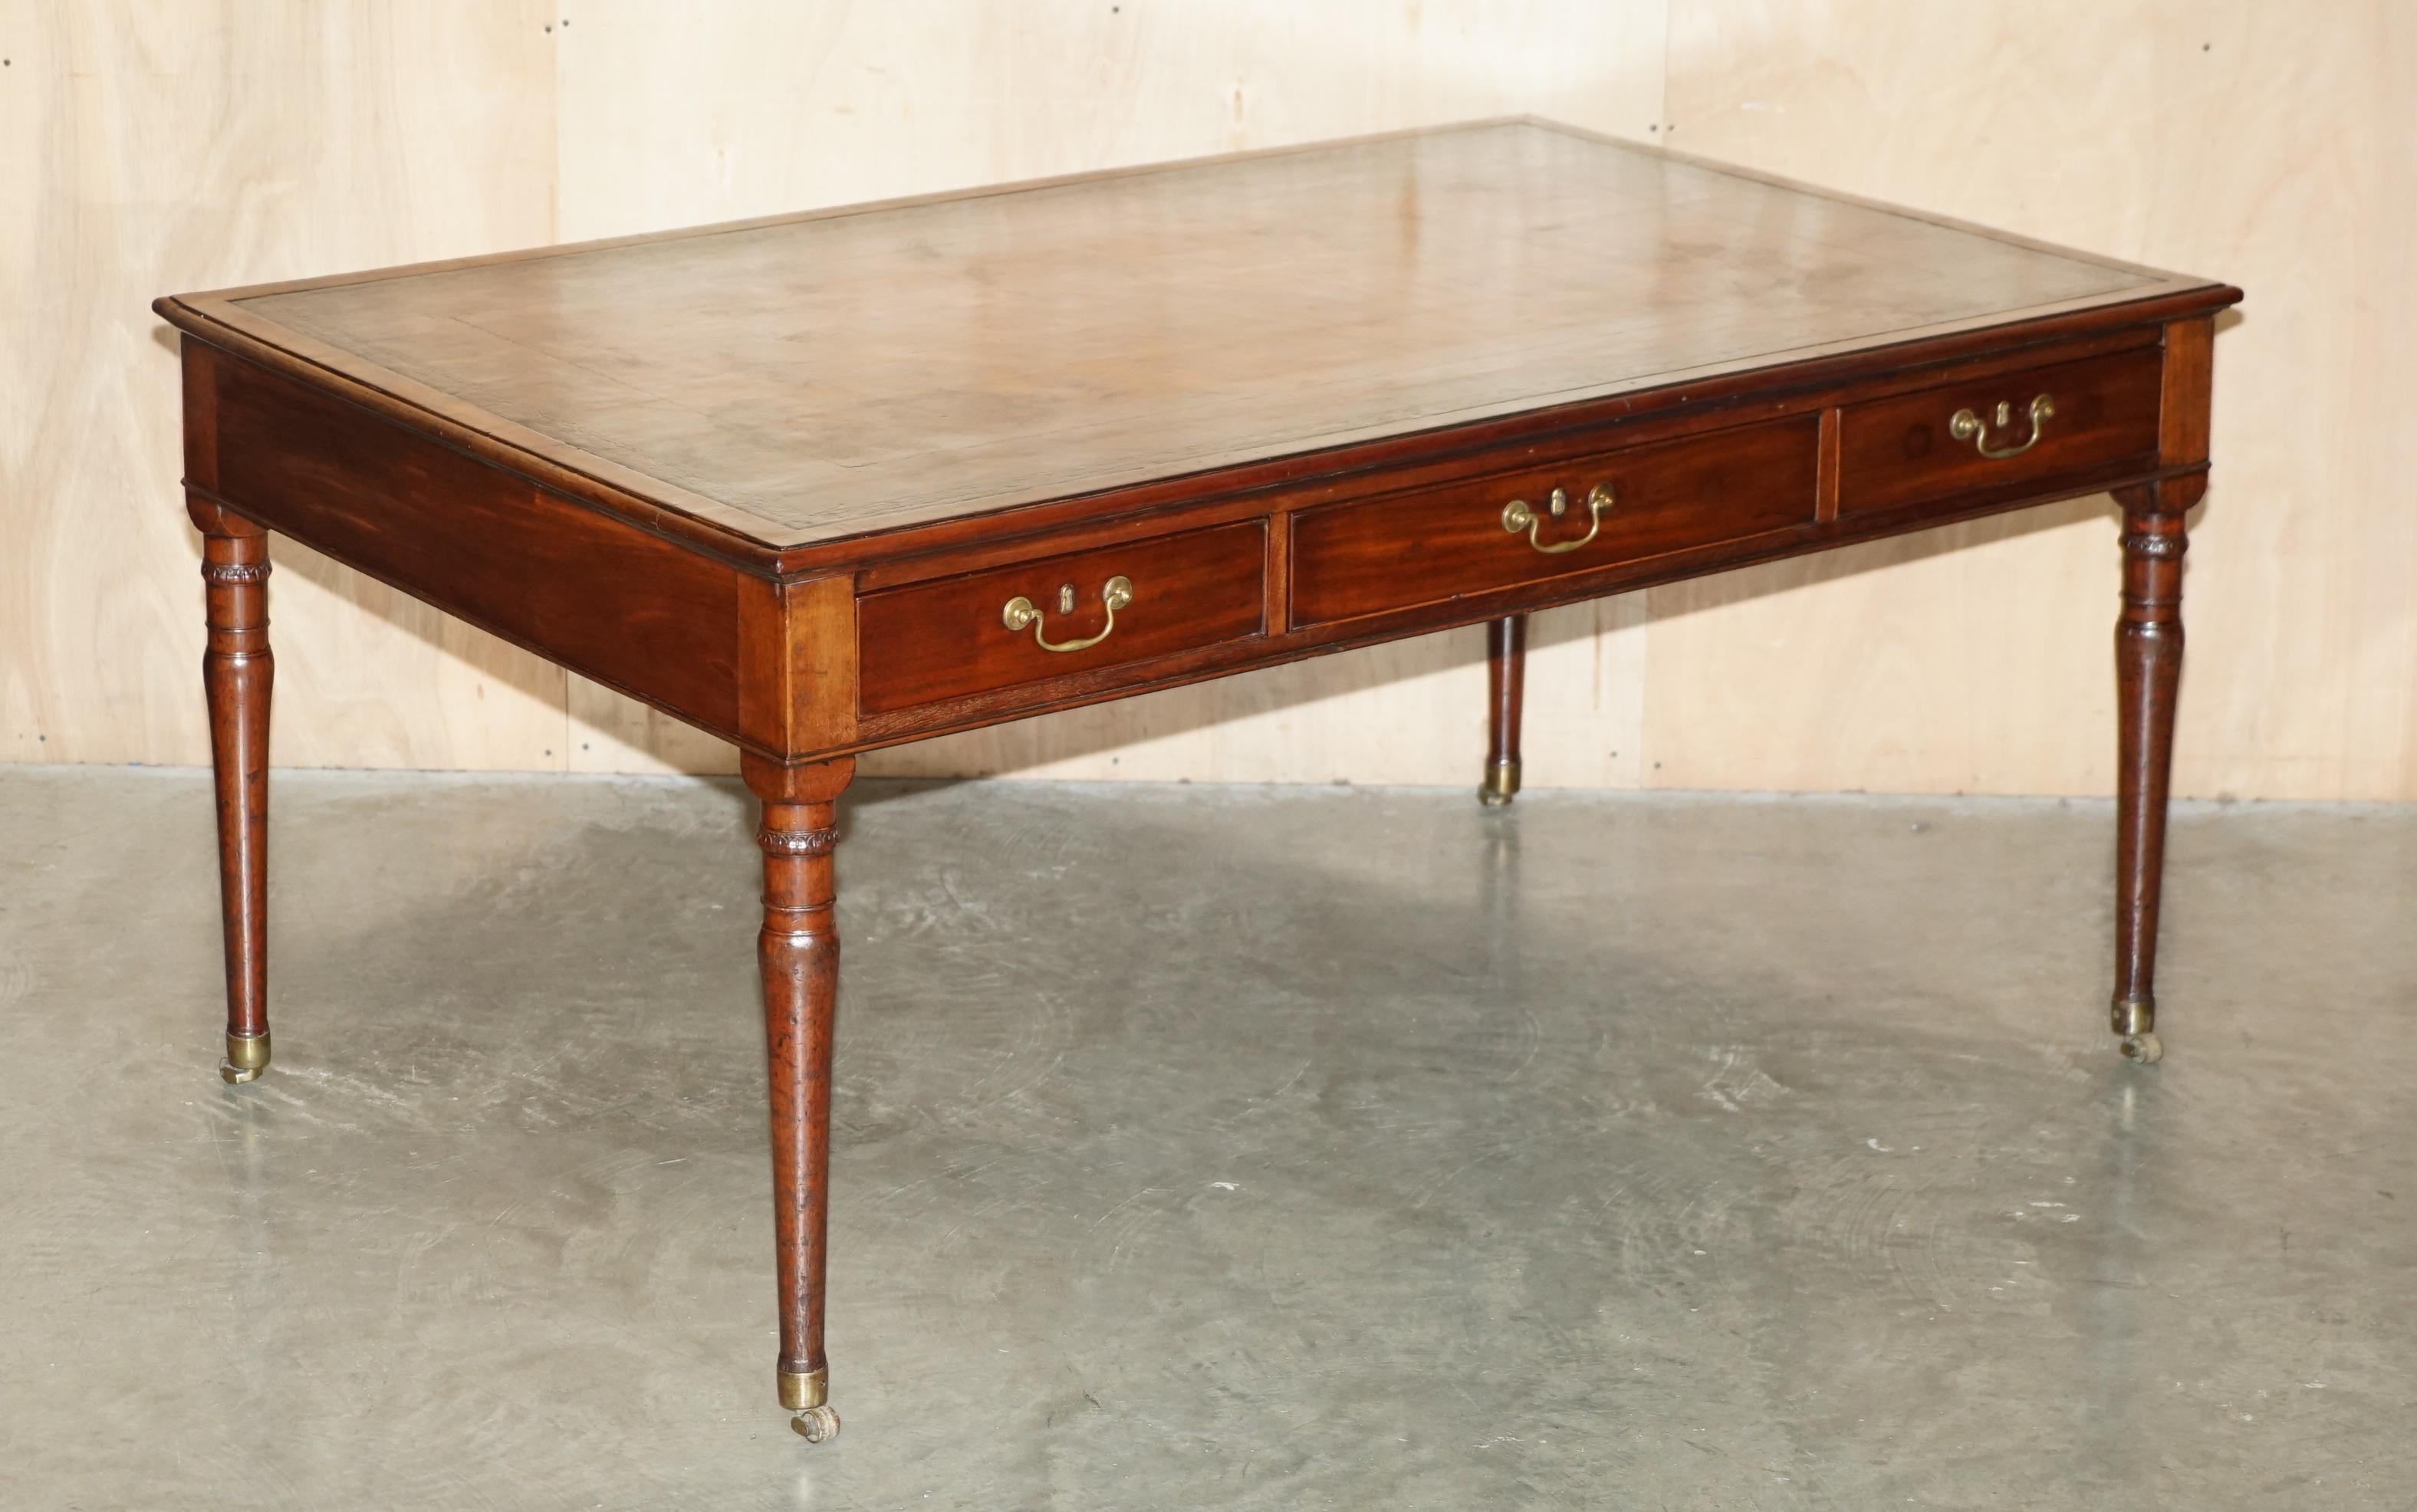 Royal House Antiques

Royal House Antiques is delighted to offer for sale this absolutely exquisite fully restored Georgian Irish circa 1780 double sided writing table desk with hand dyed brown leather top and ornately carved legs 

Please note the